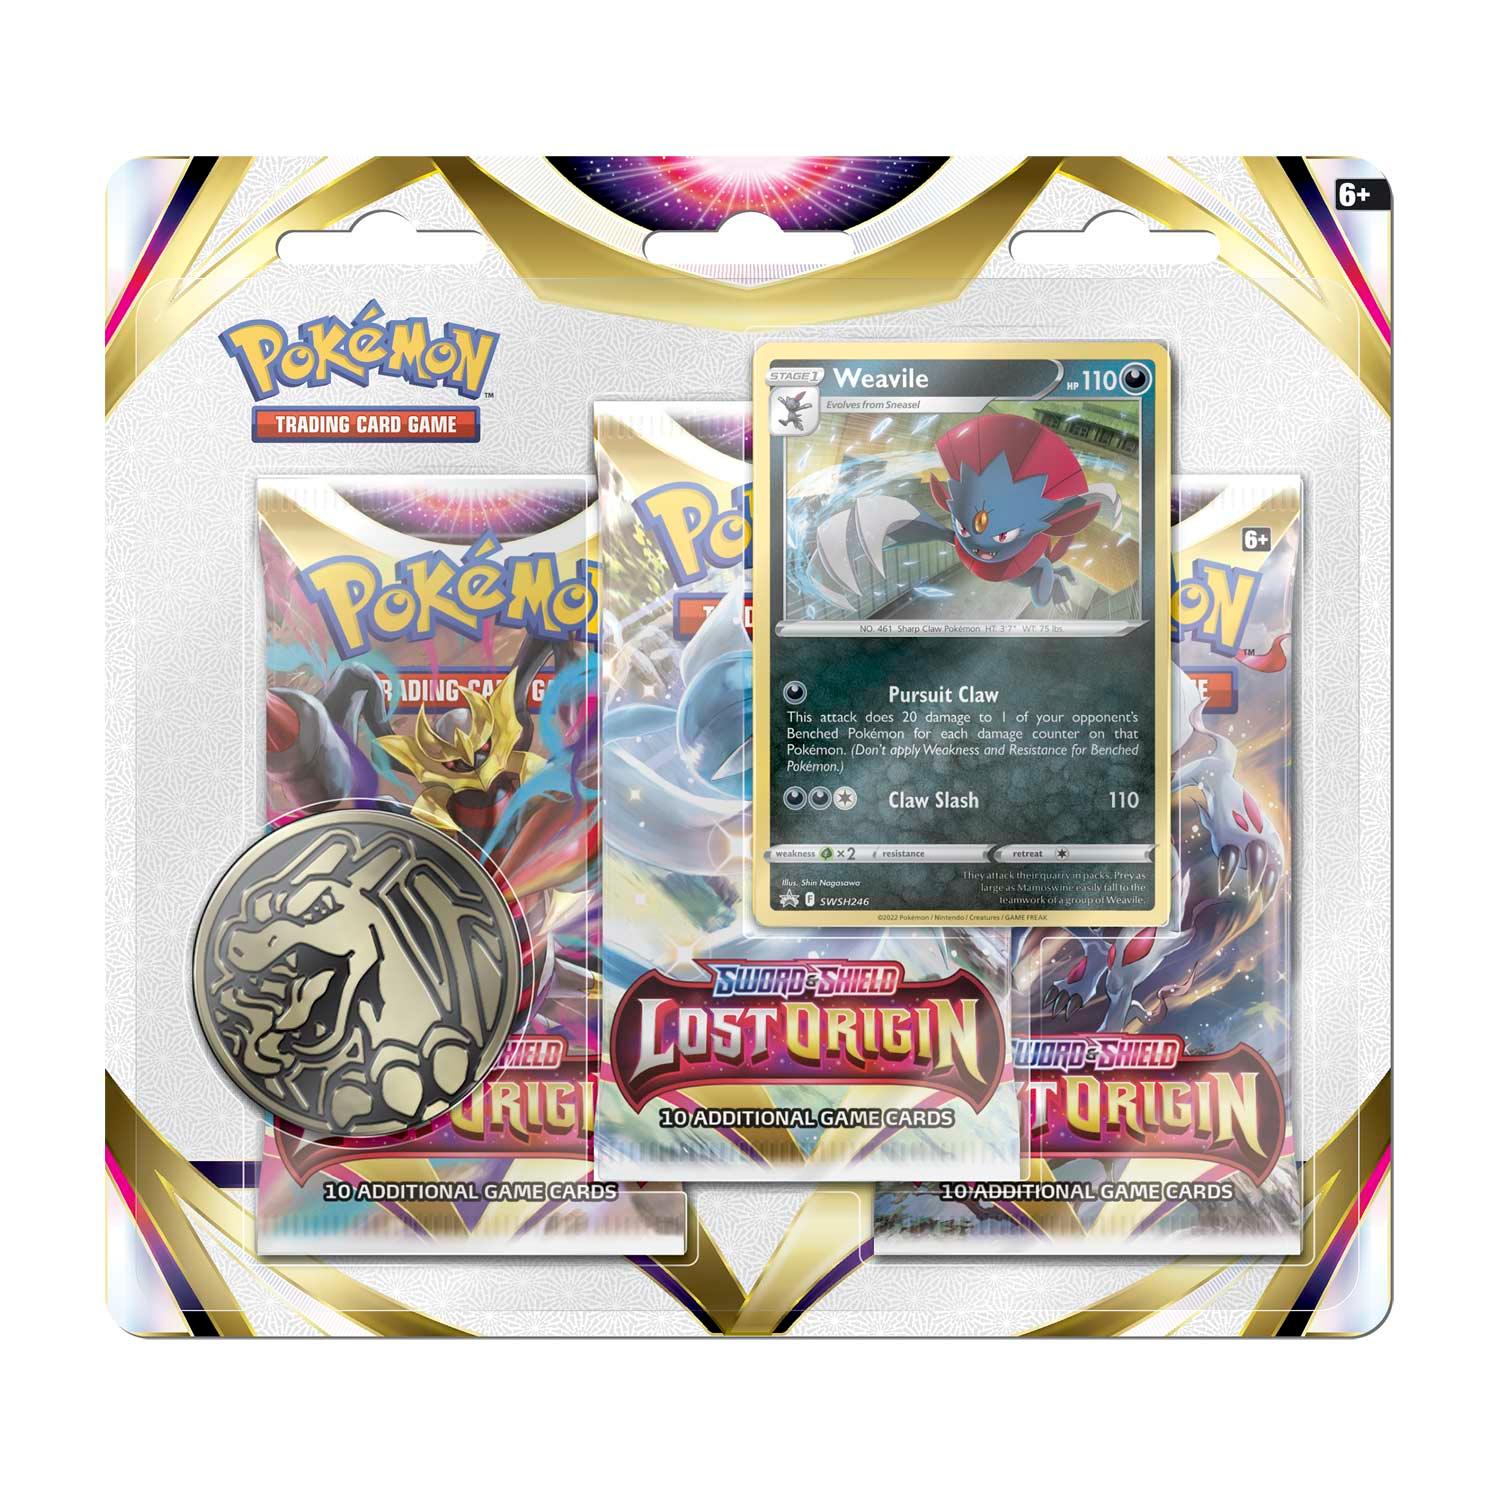 Pokemon Triple Booster Pack - Sword & Shield - Lost Origin - 3 Boosters Packs & Weavile Promo Card & 1 Coin - Hobby Champion Inc